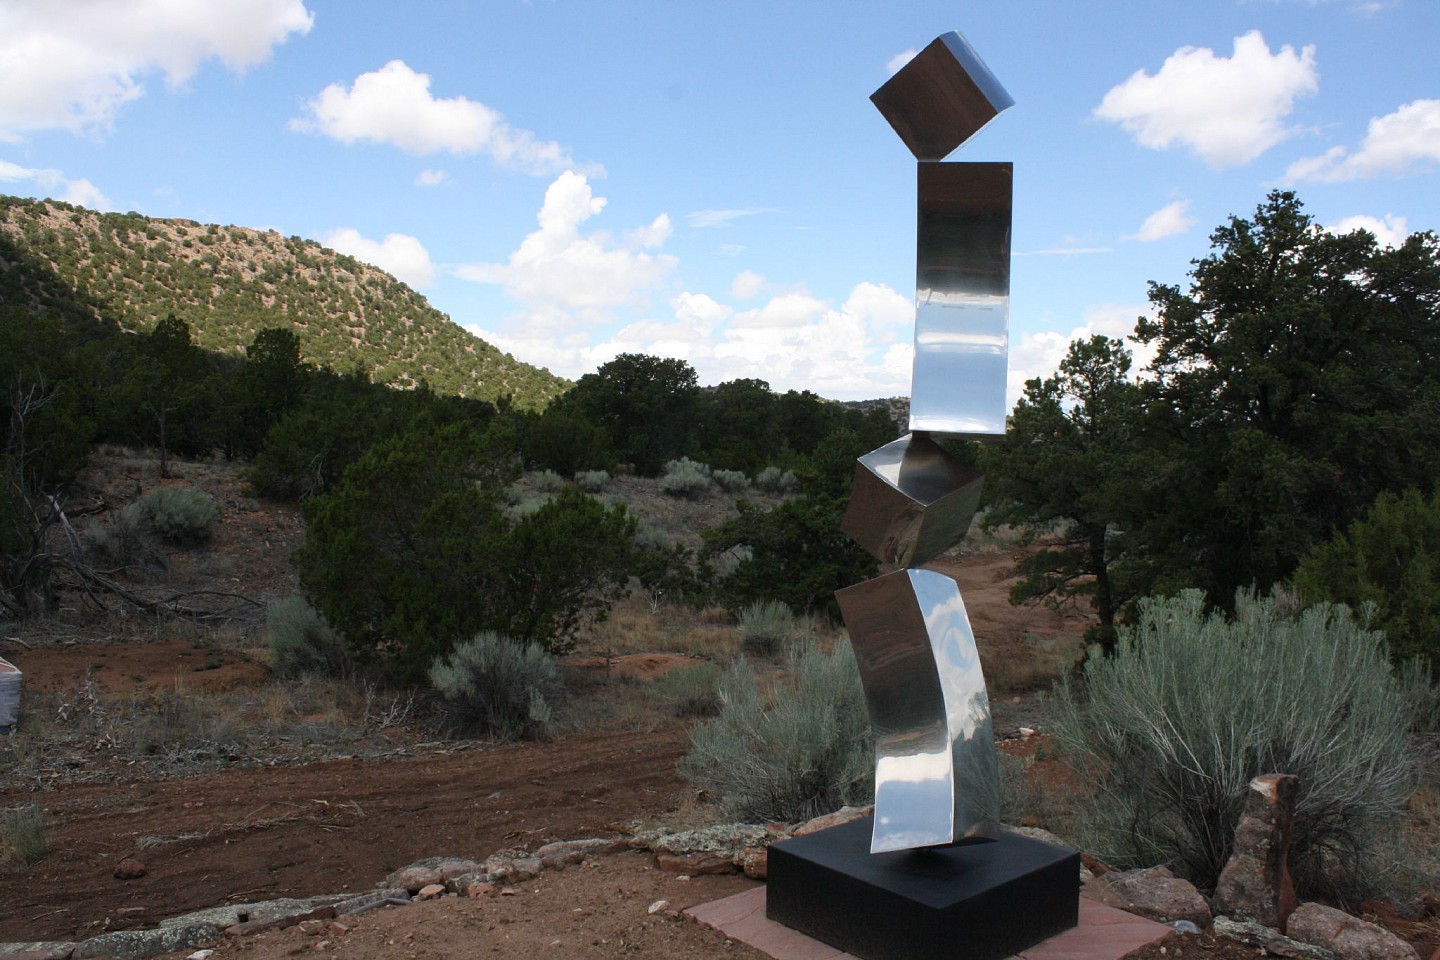 Gino Miles, Z C (based on Morse Code Series), 2019
stainless steel, 84" tall, (pedestal is 12"x30"x30")
MILE00040